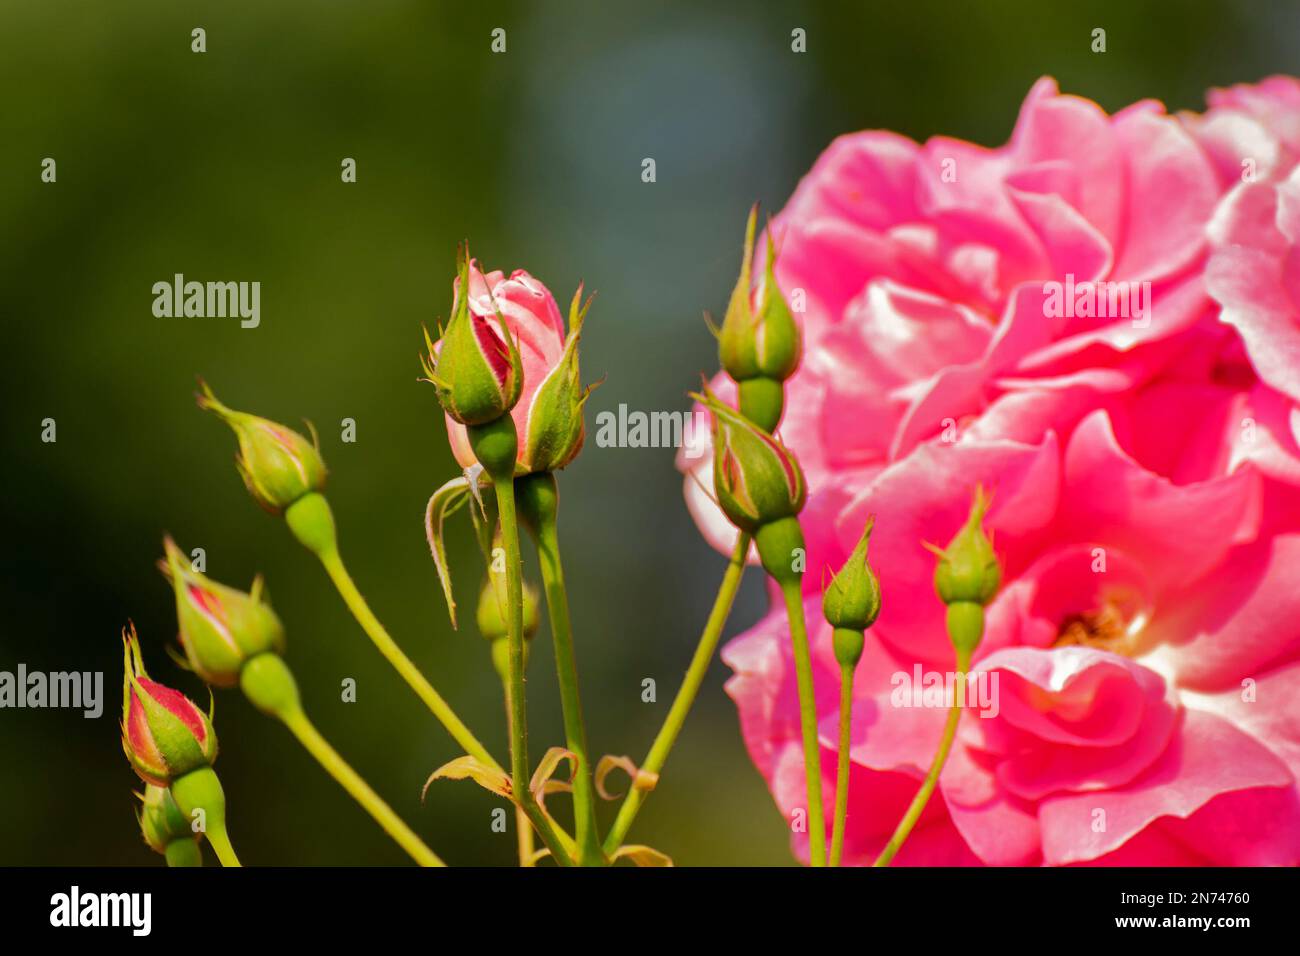 Buds of rose,flower of the woody perennial flowering plant, genus Rosa , family Rosaceae. There are over three hundred species and many subspecies. Stock Photo